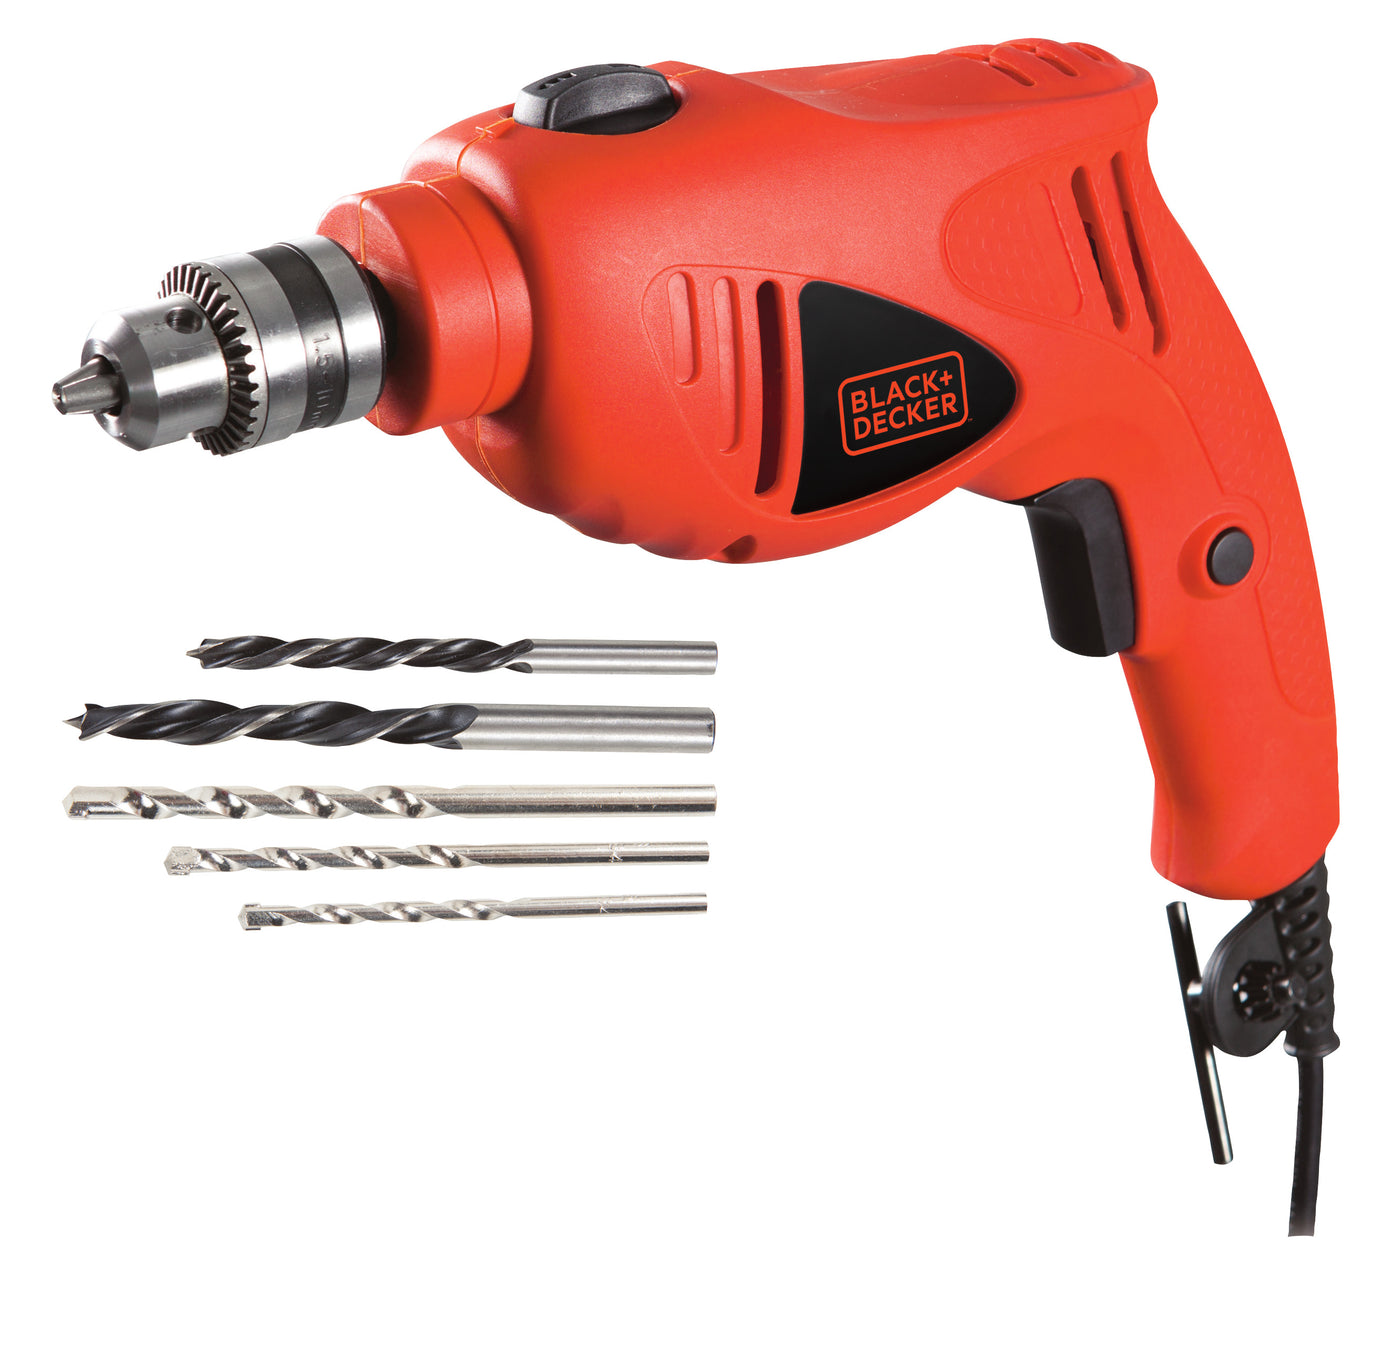 Hammer Drill Single Speed For Wood, Steel And Masonry Drilling With 5-Pieces High Performance Masonry Drill Bits 500W